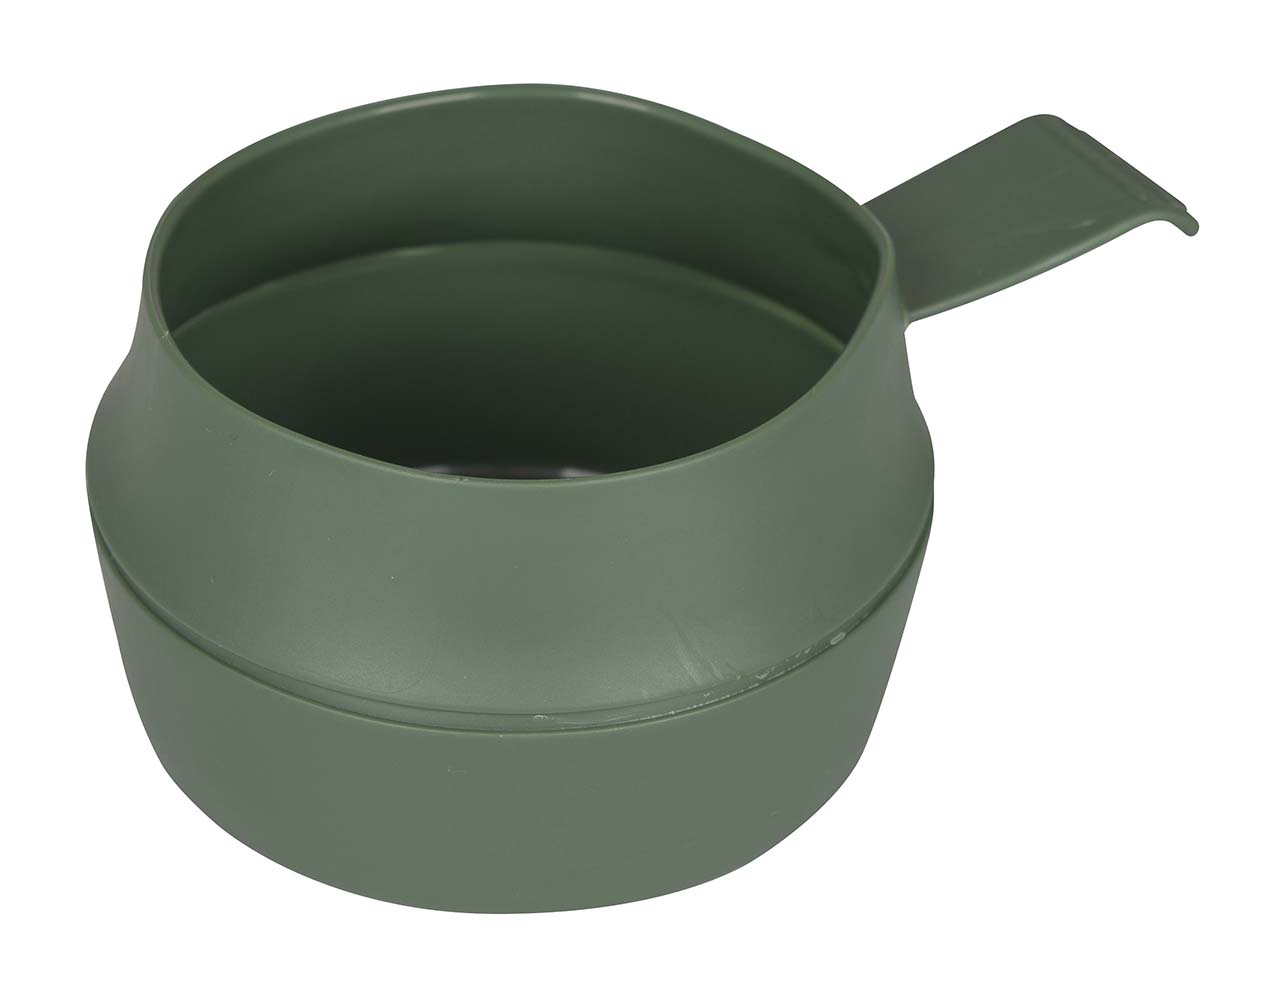 6101630 A compact foldingscissor. This bowl can be folded up and easily stored. This makes it ideal when hiking, backpacking or camping. This cup is also known for its use in the military.